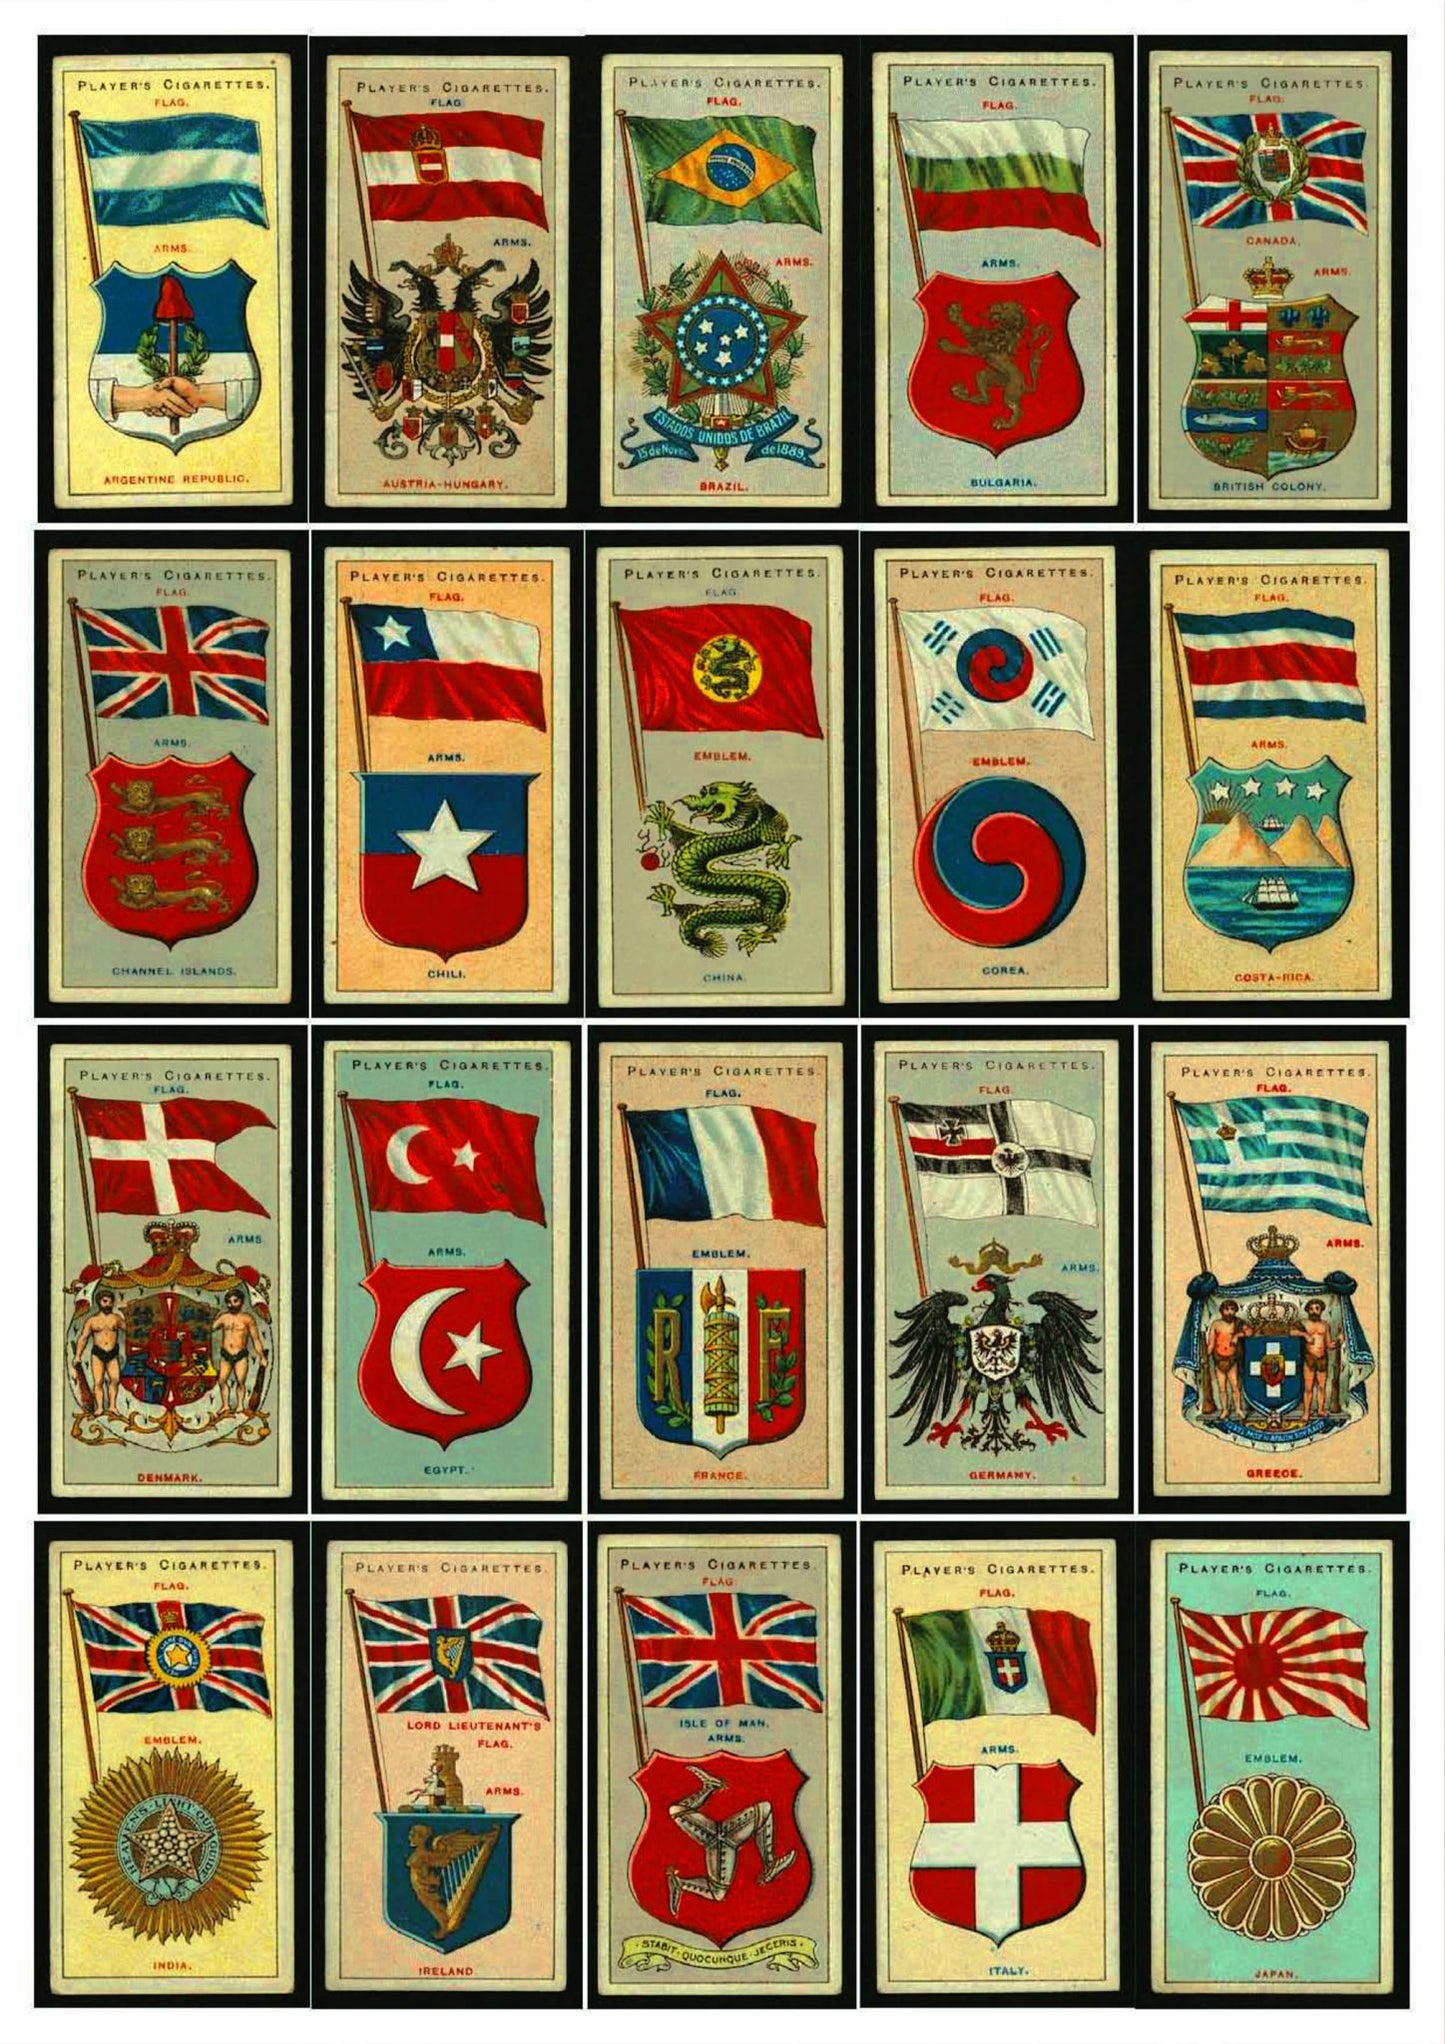 Player's Cigarettes Flag Poster - Amazing Maps